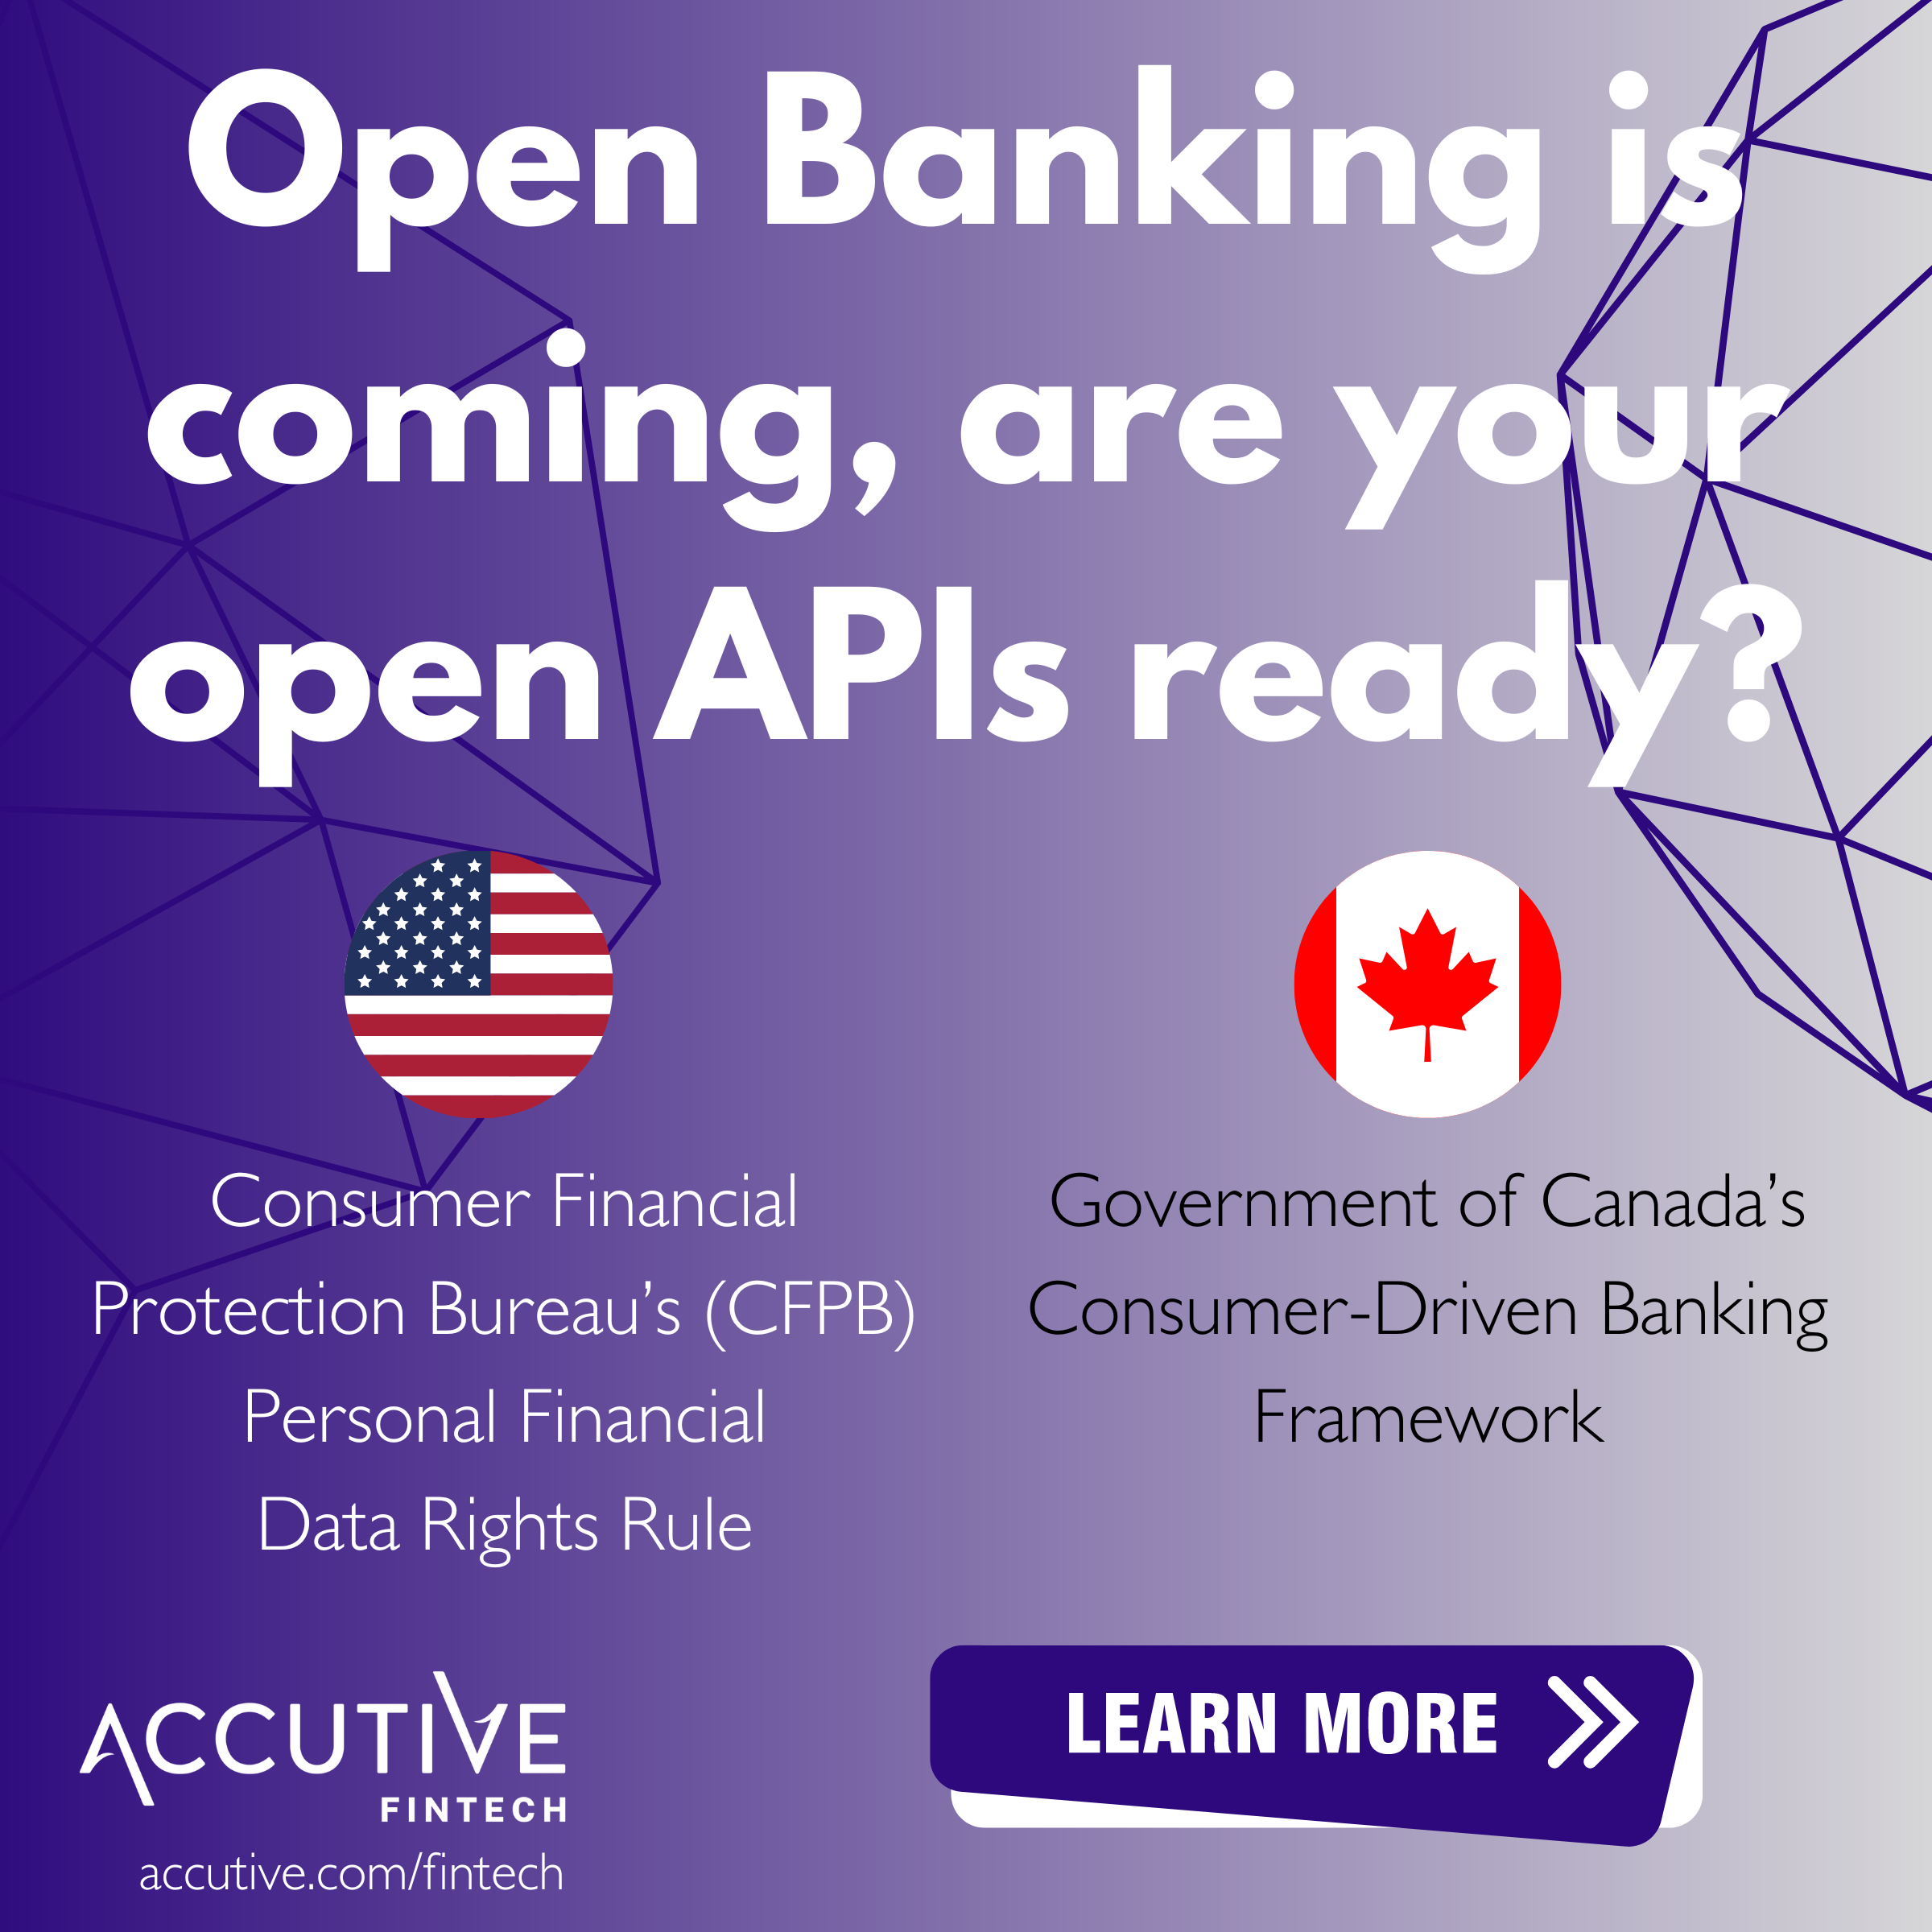 Open banking is coming to the US and Canada, are your open APIs ready?